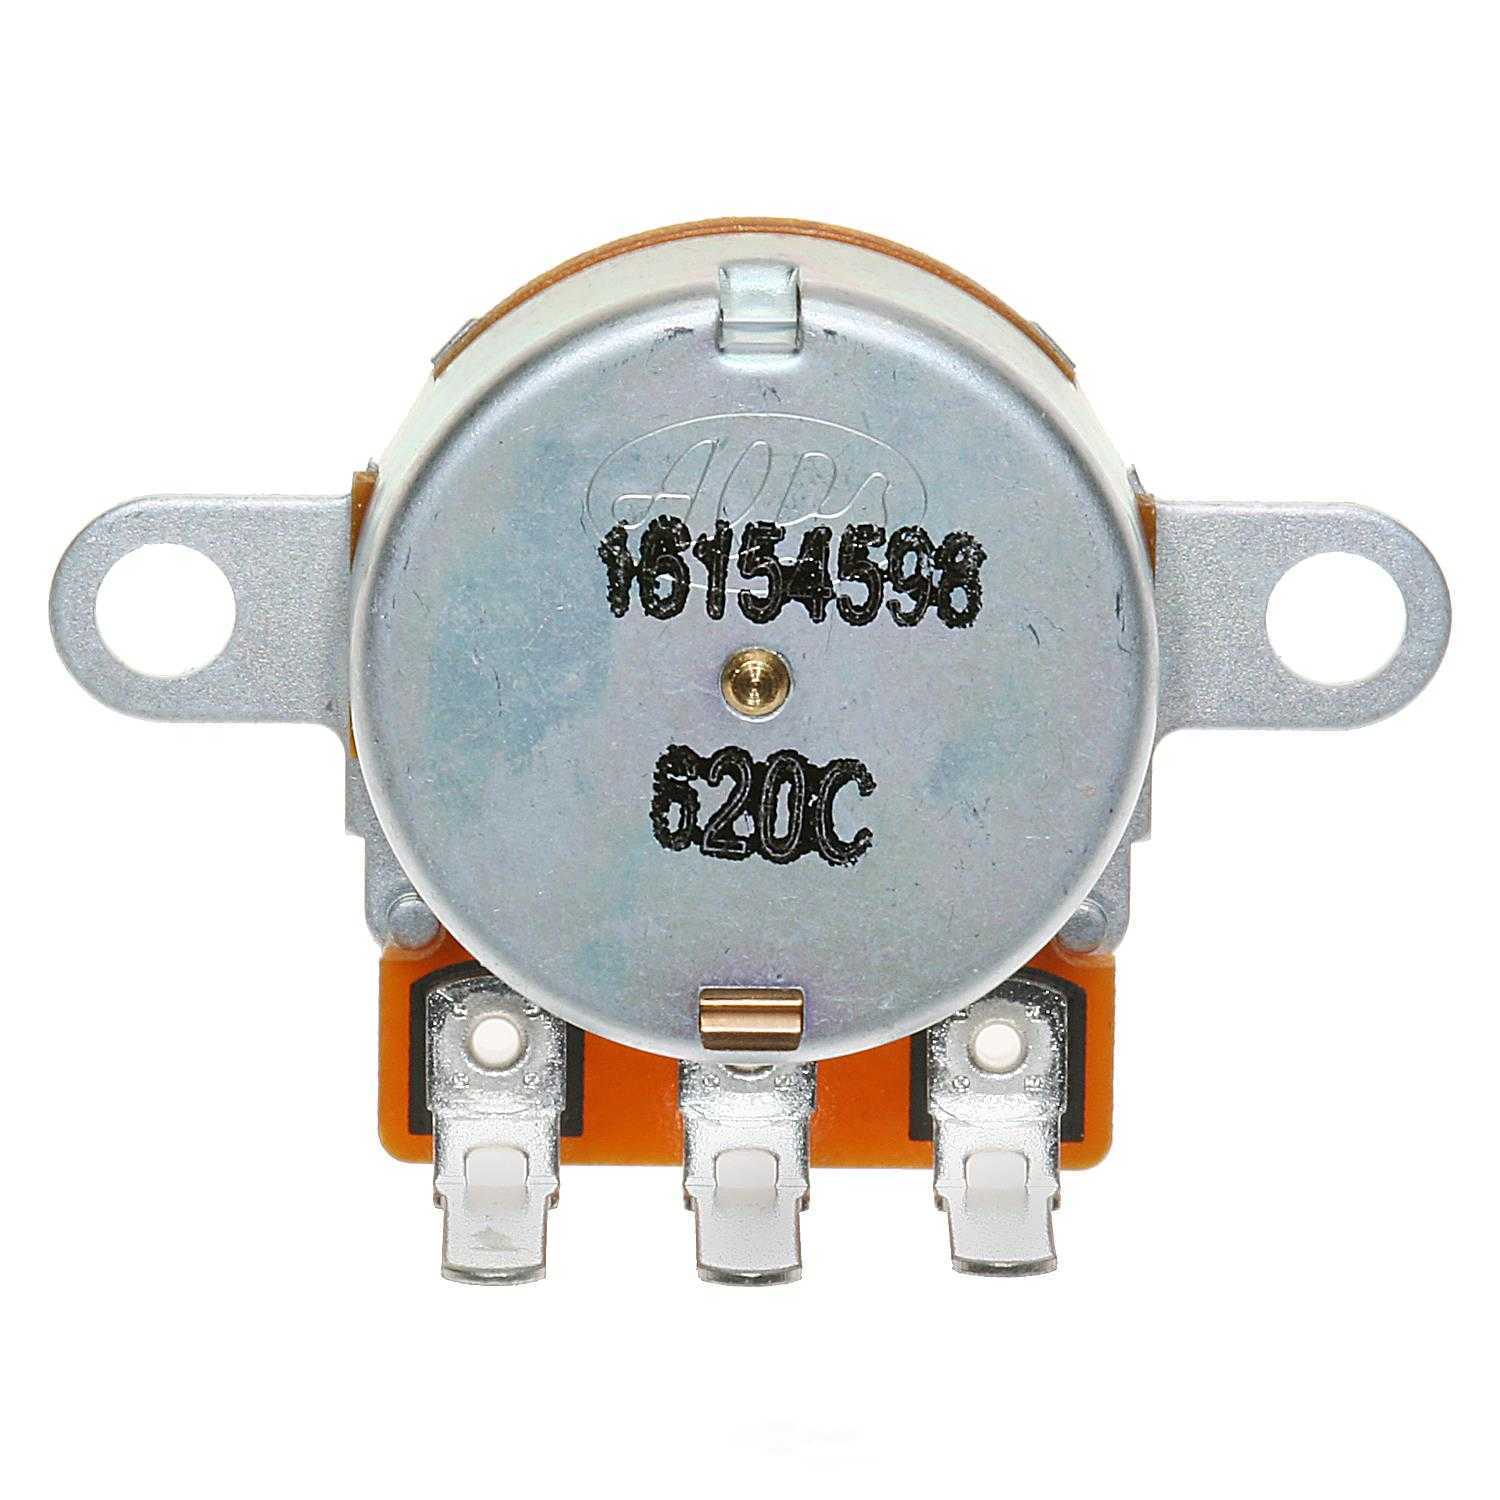 STANDARD MOTOR PRODUCTS - A/C Selector Switch - STA HS-348